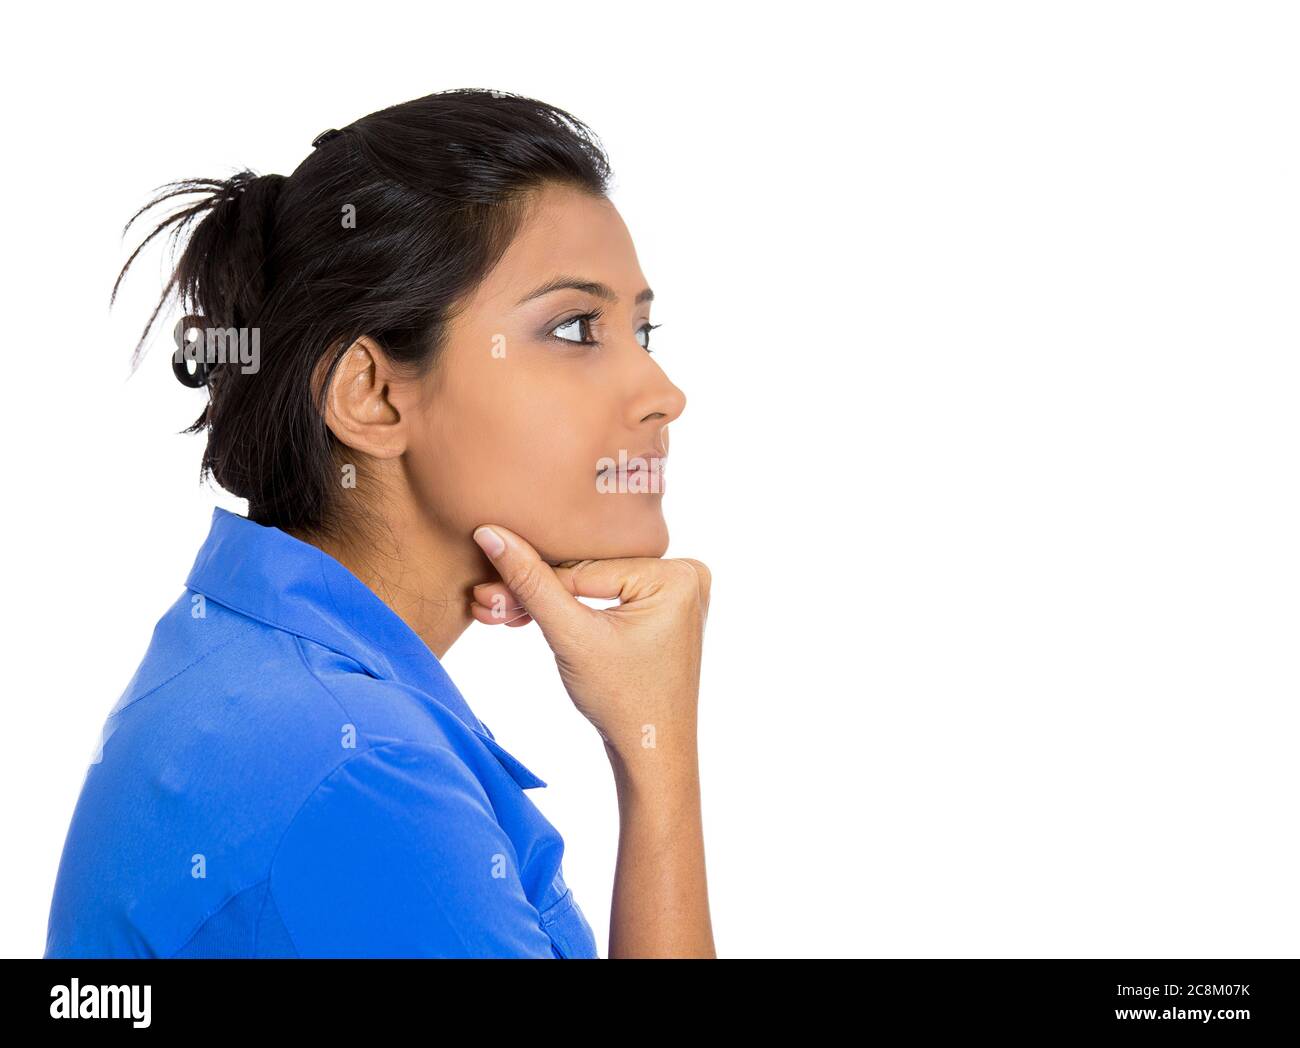 Side profile portrait of a young woman thinking daydreaming isolated on white background. Stock Photo